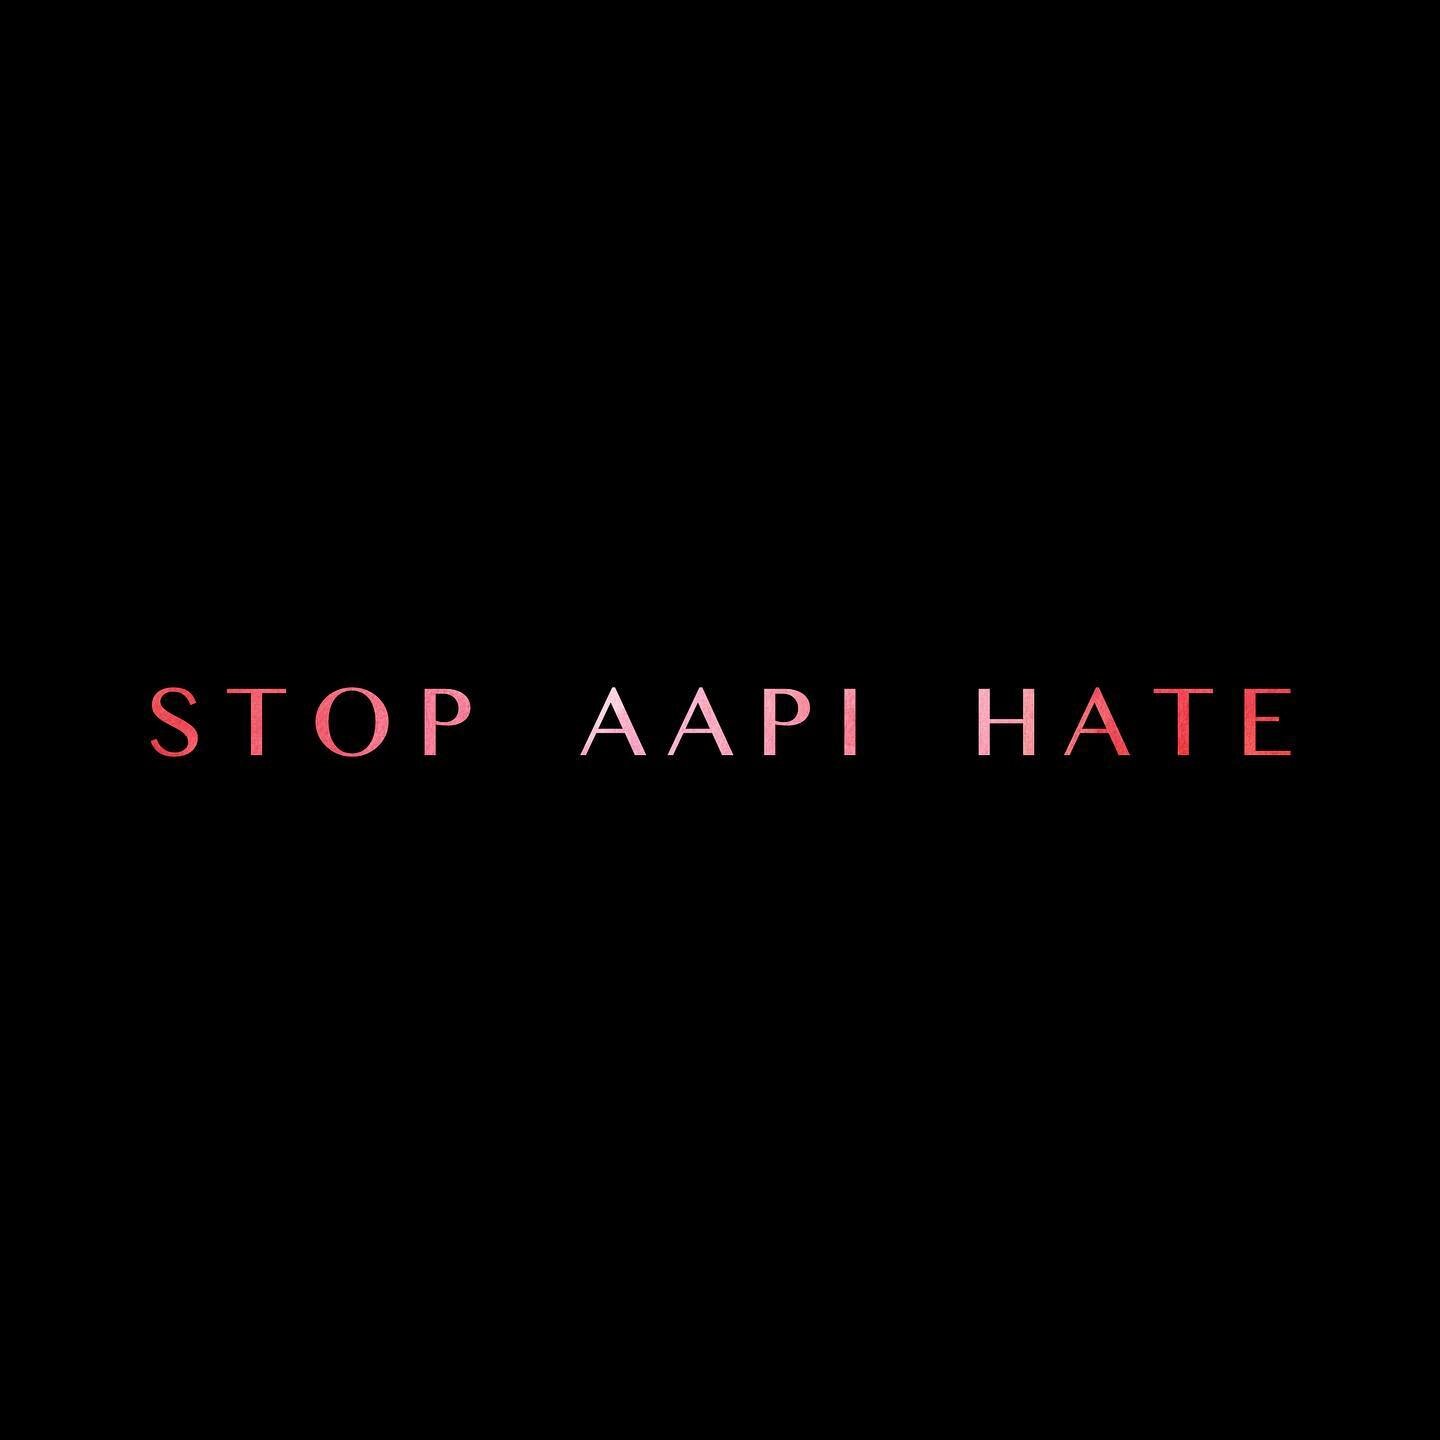 There have been a horrifying 3,800 REPORTED instances of hate, terror and discrimination against the Asian-American and Pacific Islander communities this past year (@stopaapihate), meaning many, many more have likely gone unreported. To our AAPI frie